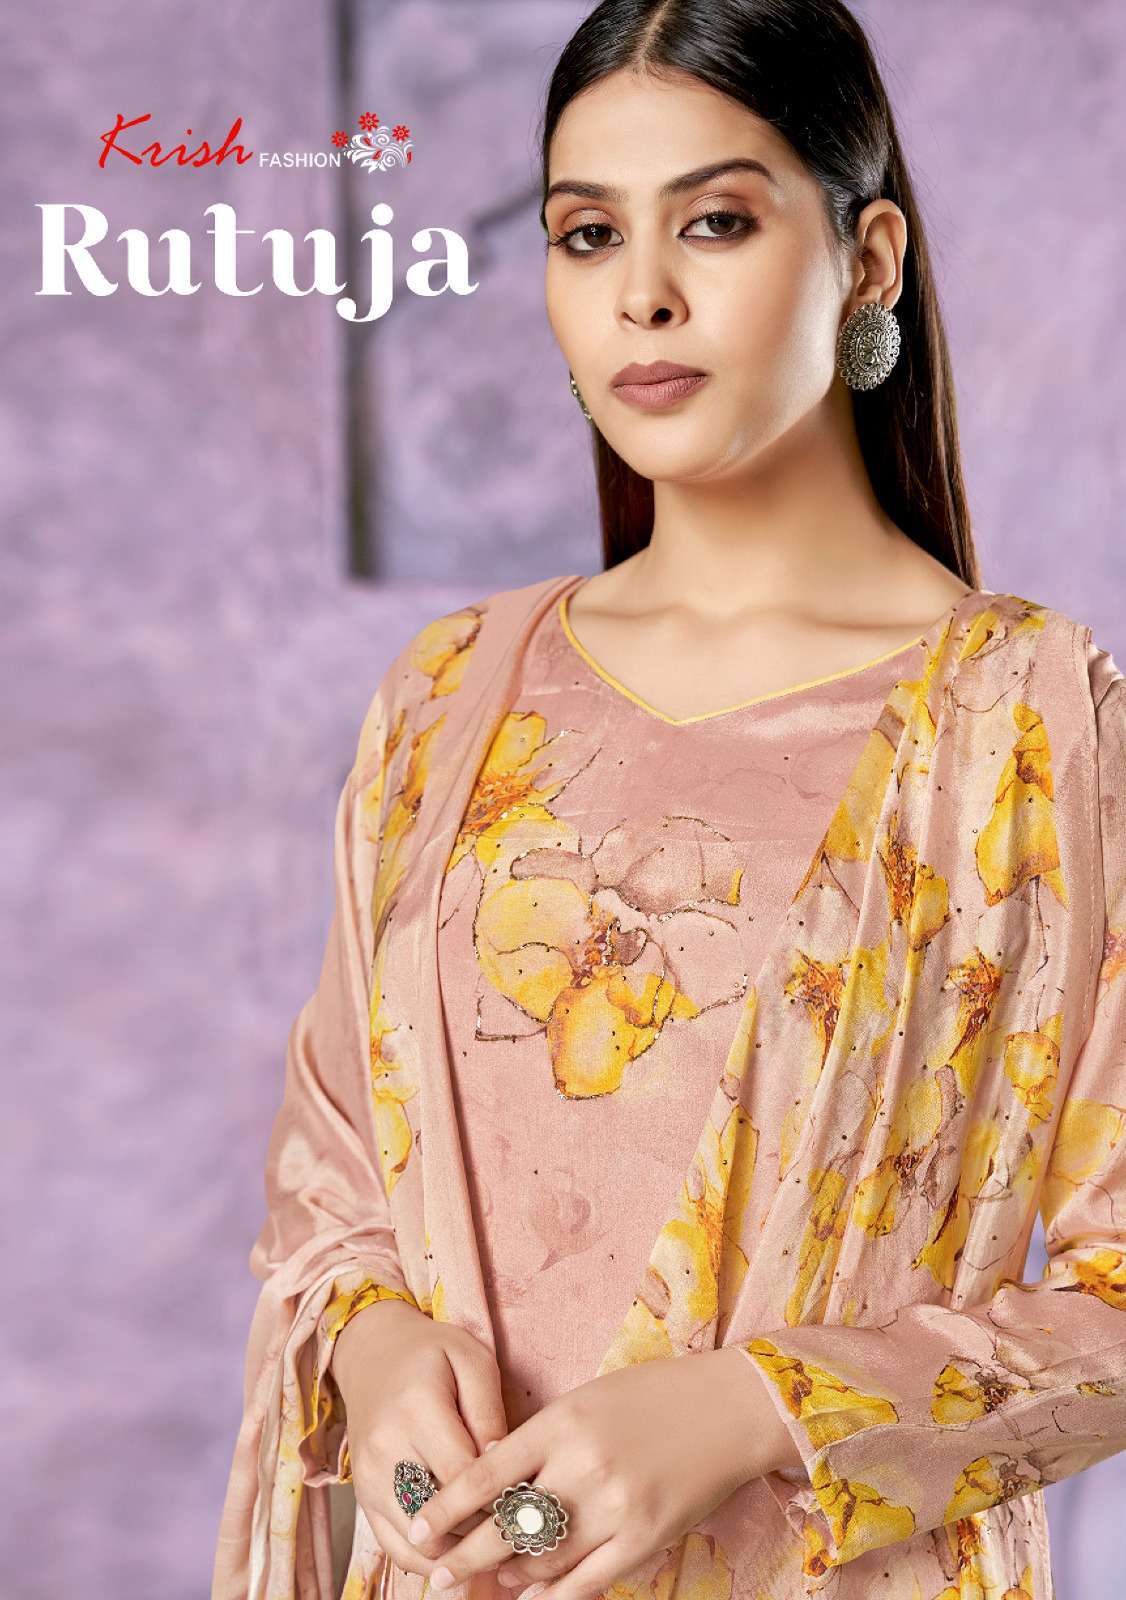 Krish Rutuja 2236 Branded Traditional Wear Fancy Suit Catalog Suppliers